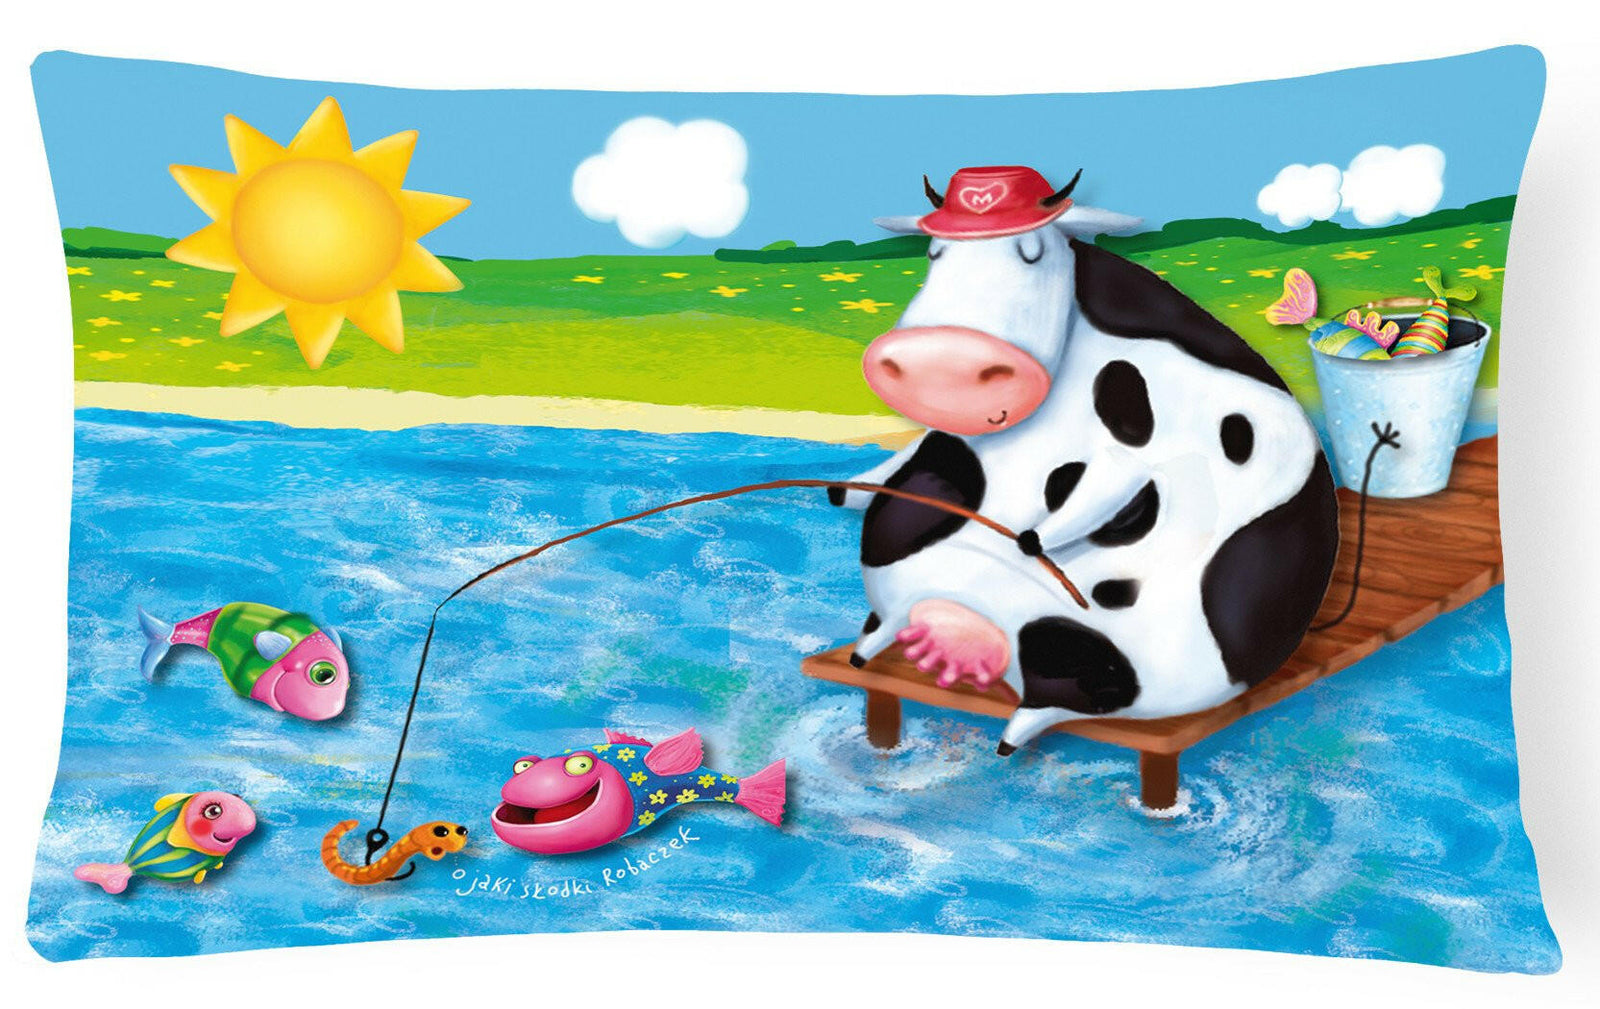 Cow Fishing off of a Pier Fabric Decorative Pillow APH0085PW1216 by Caroline's Treasures